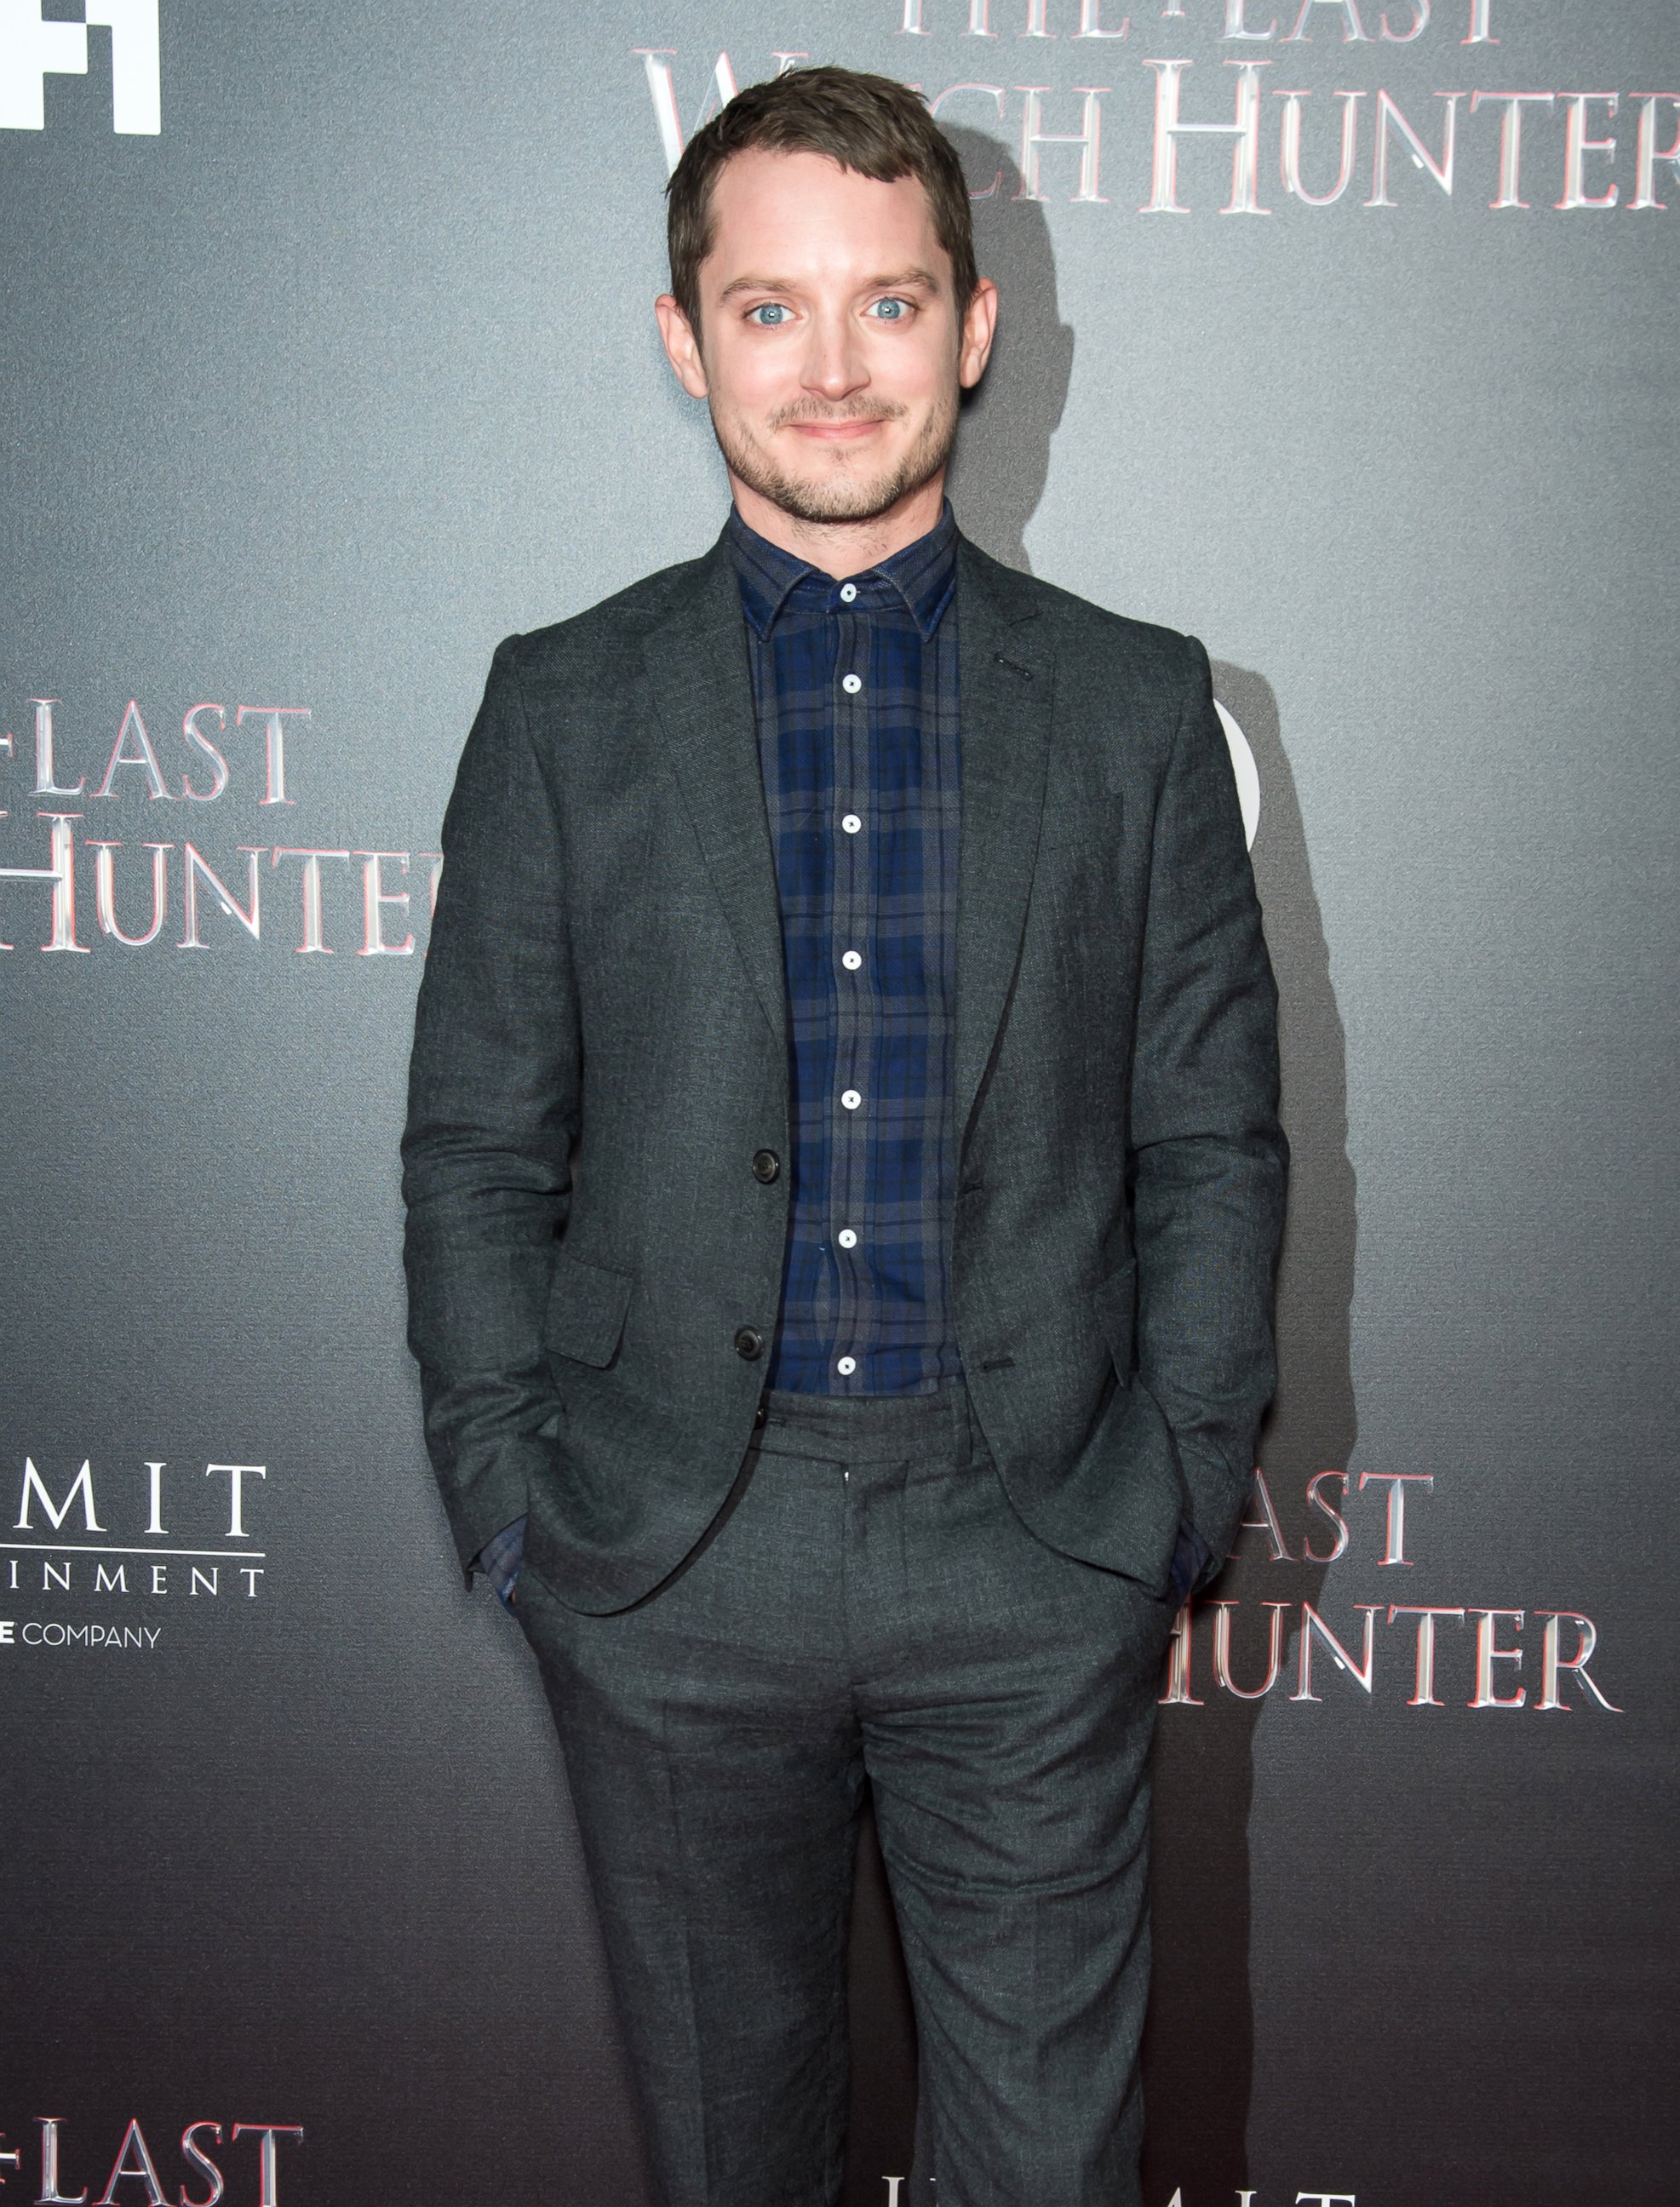 PHOTO: Elijah Wood attends "The Last Witch Hunter" New York Premiere at AMC Loews Lincoln Square, Oct. 13, 2015, in New York City.